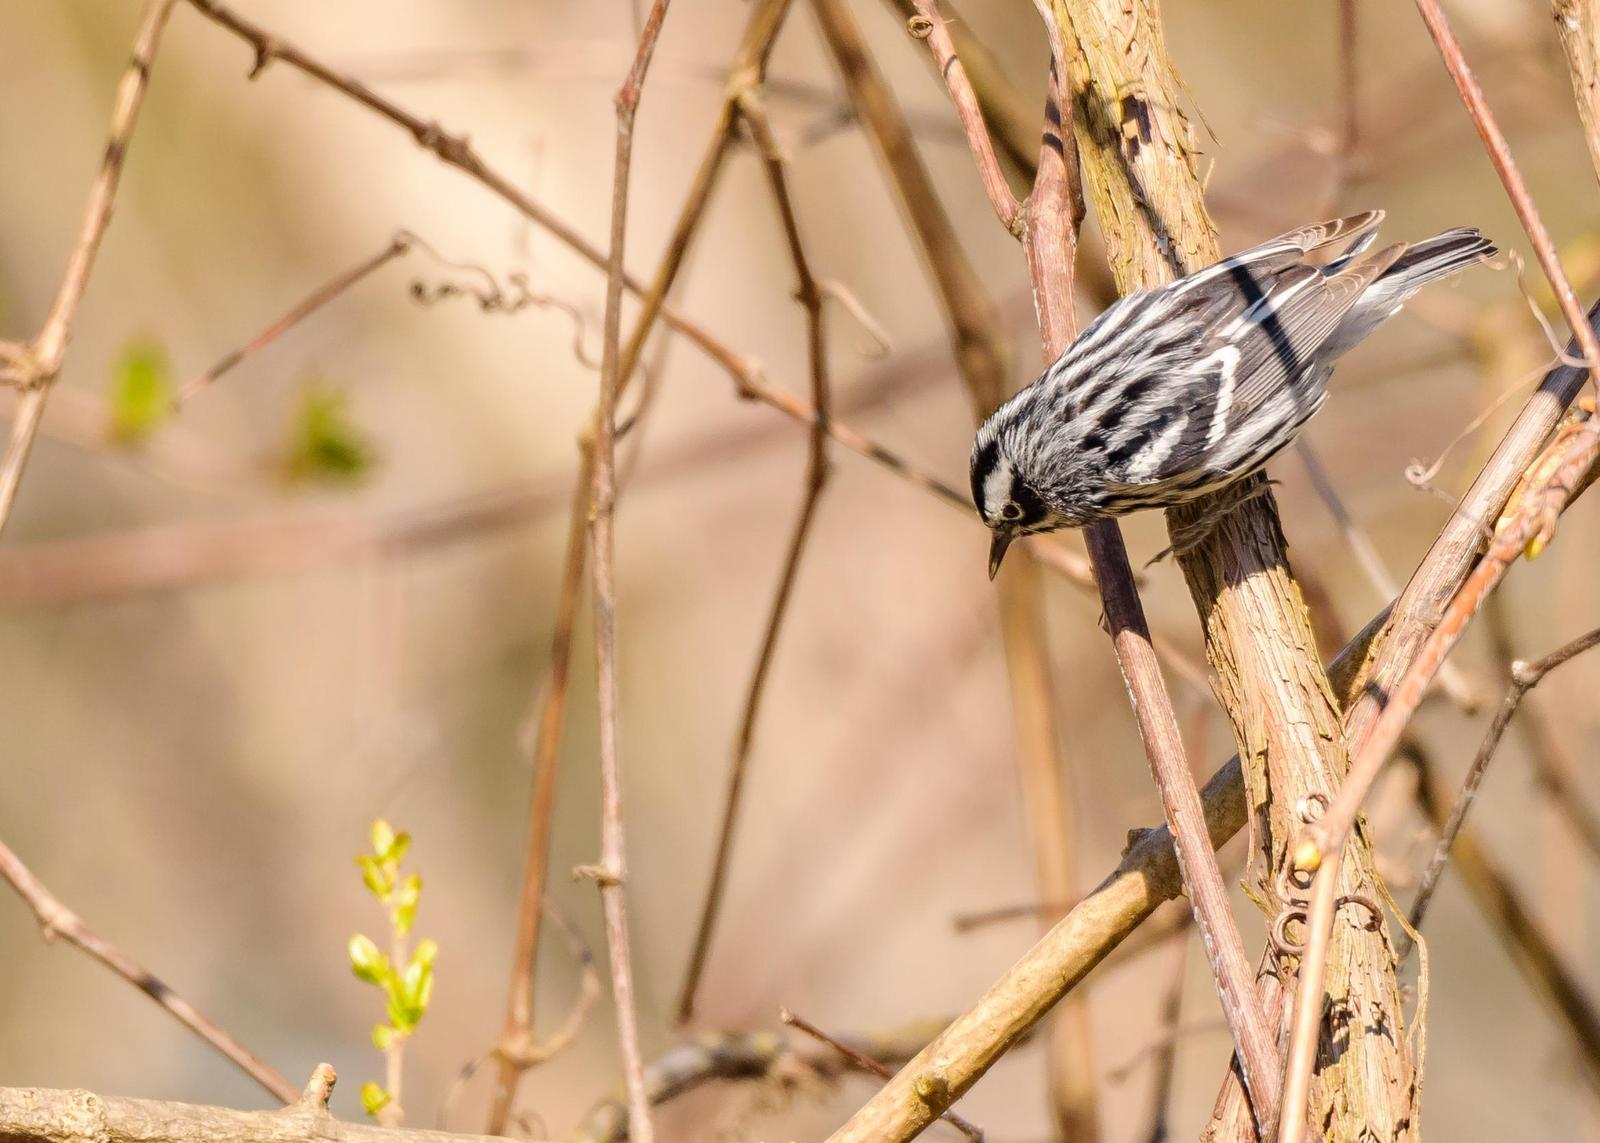 Black-and-white Warbler Photo by Keshava Mysore